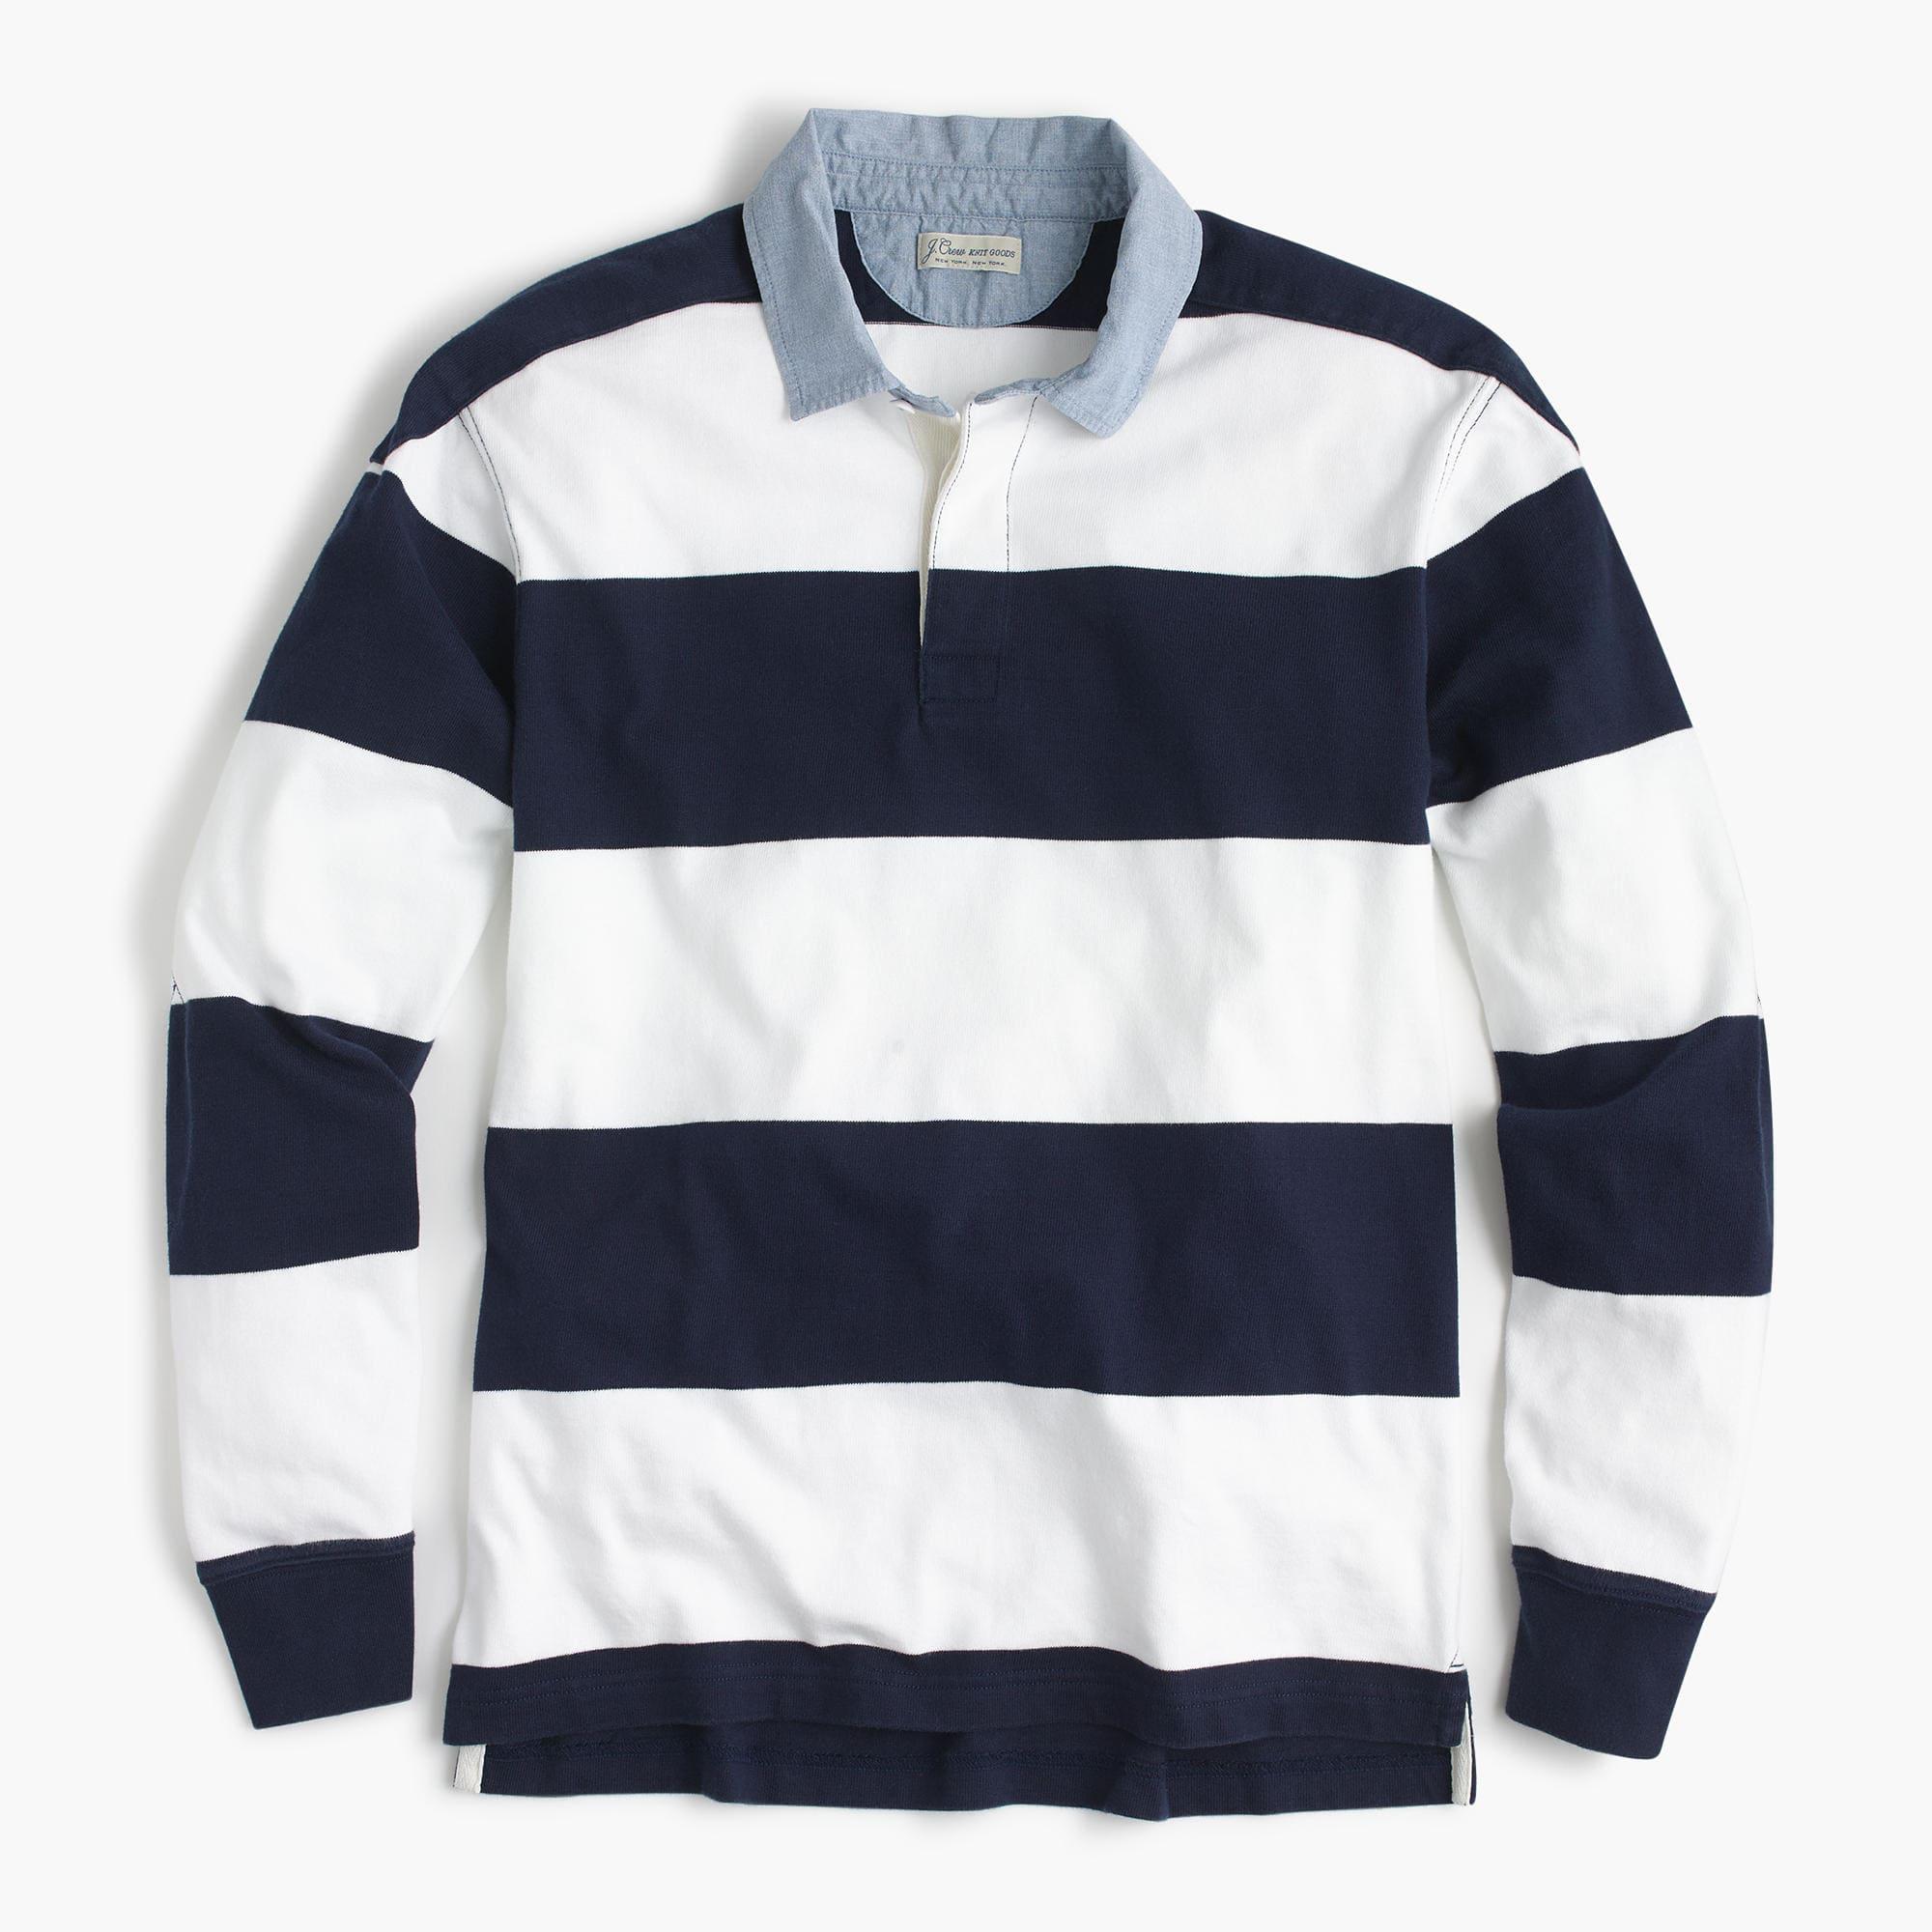 NEW MEN'S  S M L J CREW RUGBY LONGSLEEVE POLO SHIRT IN BLUE AND WHITE STRIPE 